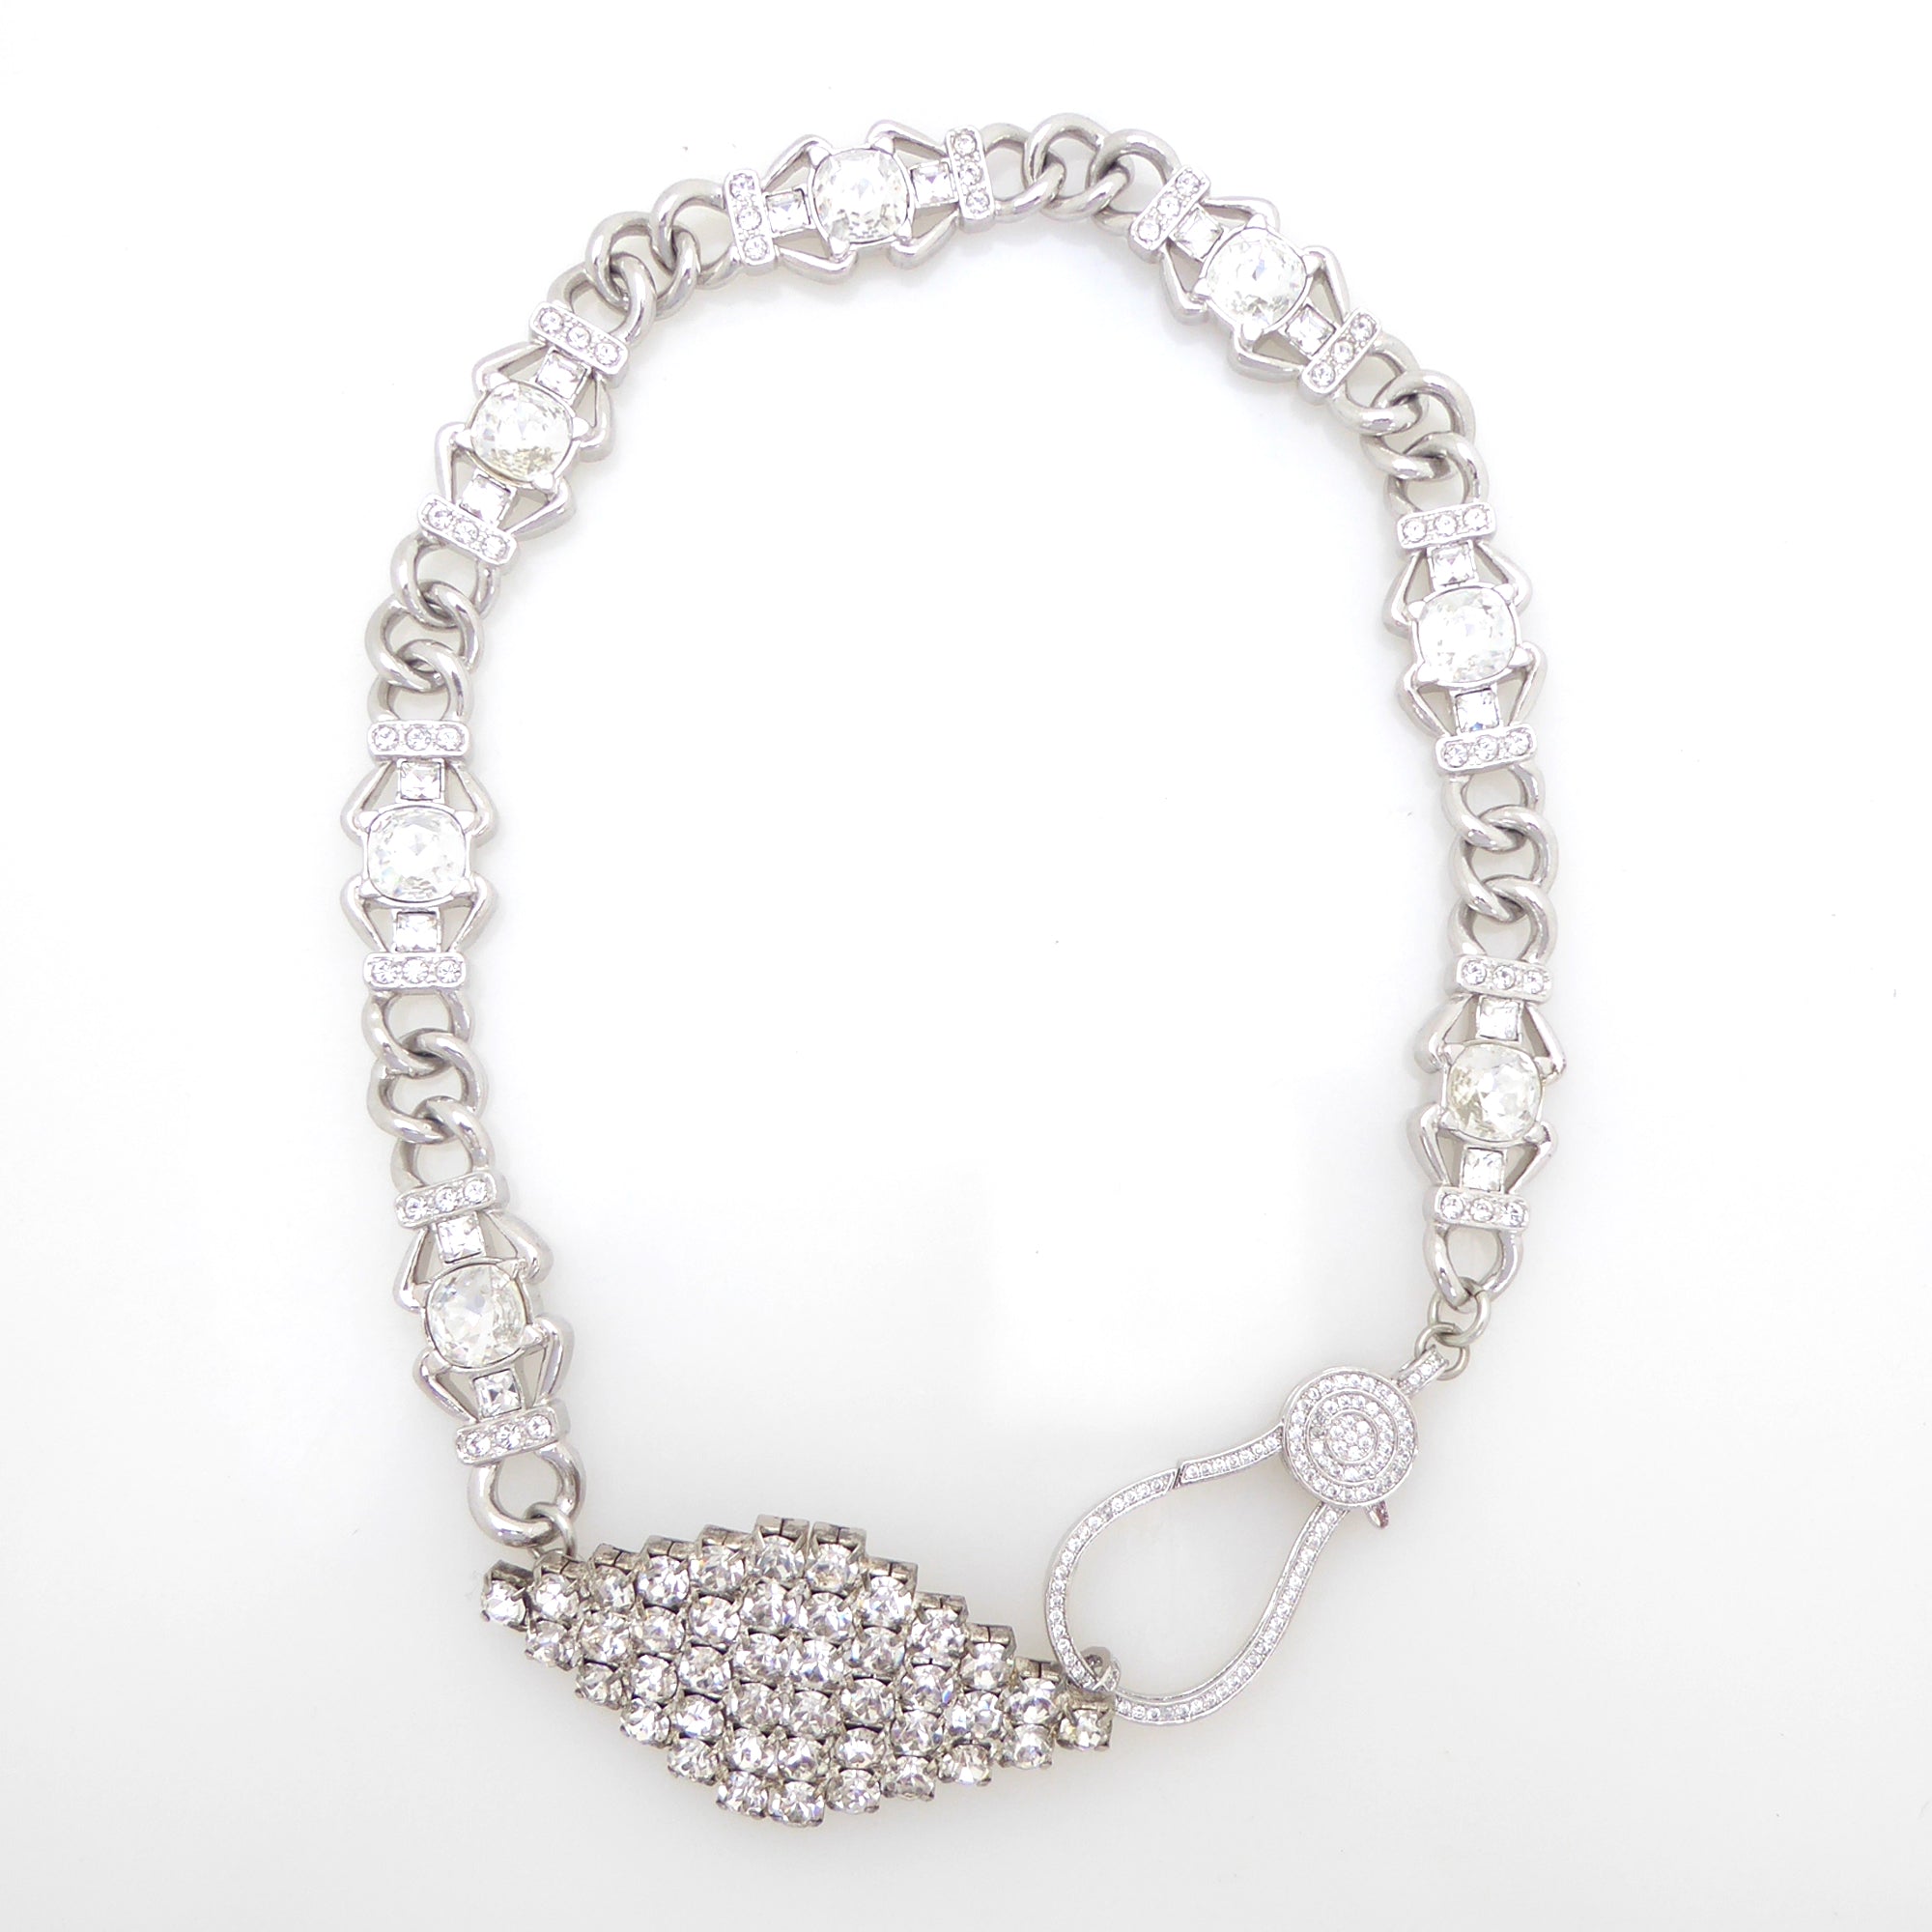 Ghiaccio silver rhinestone link and clasp necklace by Jenny Dayco 6